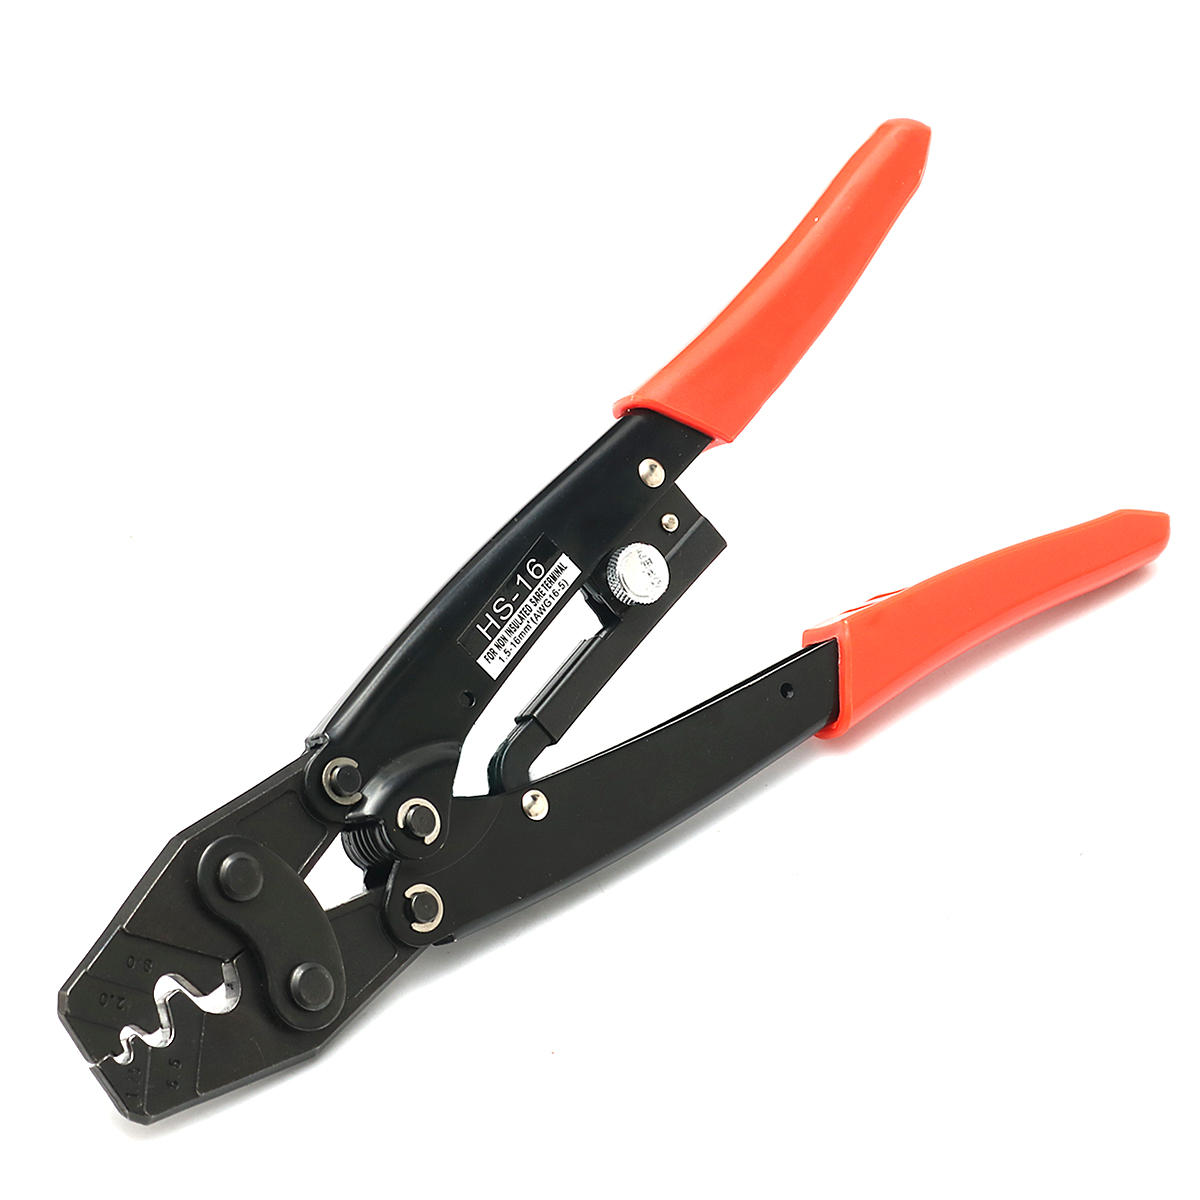 1.25-16mm² HS-16 Plier Terminal Wire Cable Lug Cutter Crimper Crimping Tool XY 